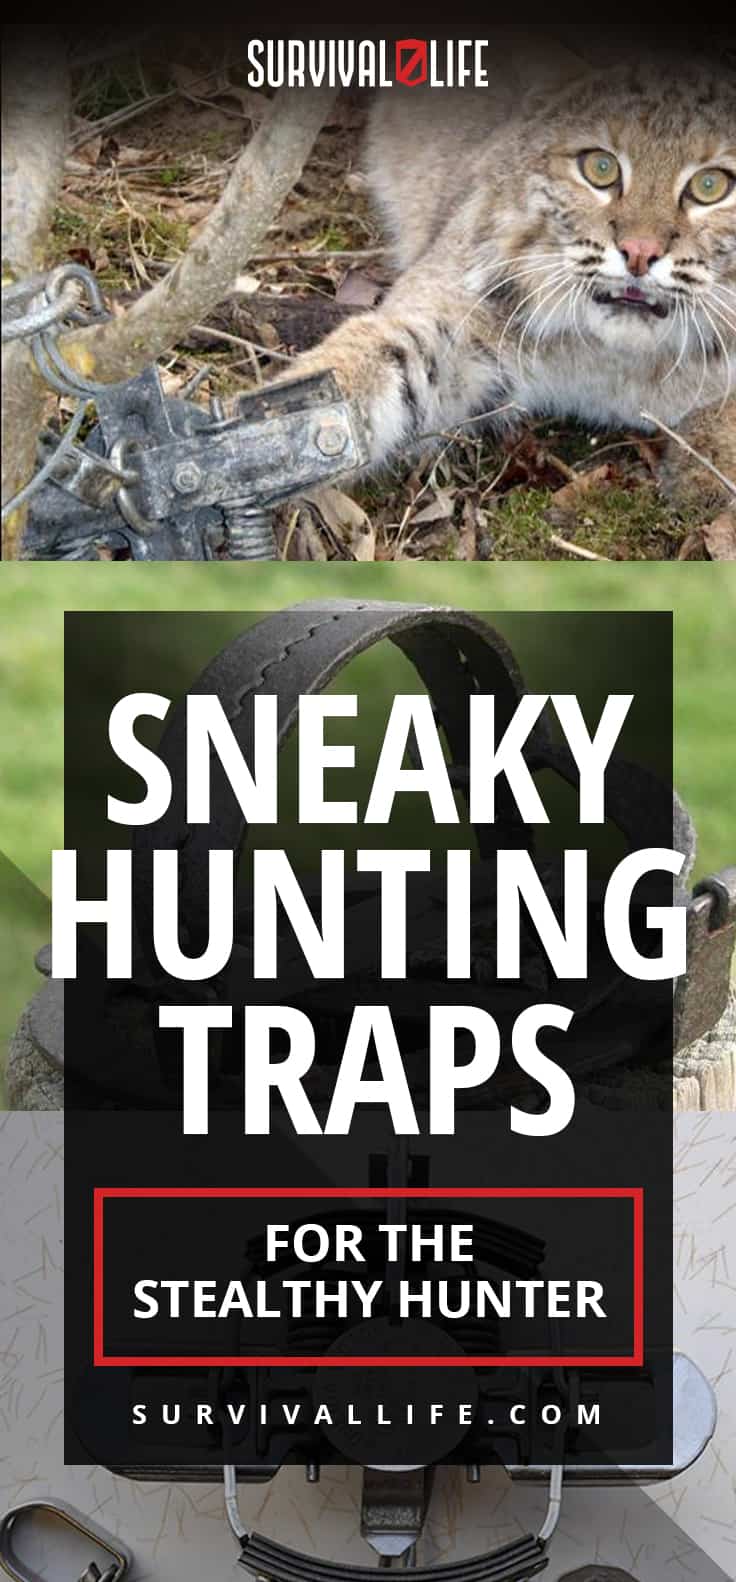 Sneaky Hunting Traps For The Stealthy Hunter